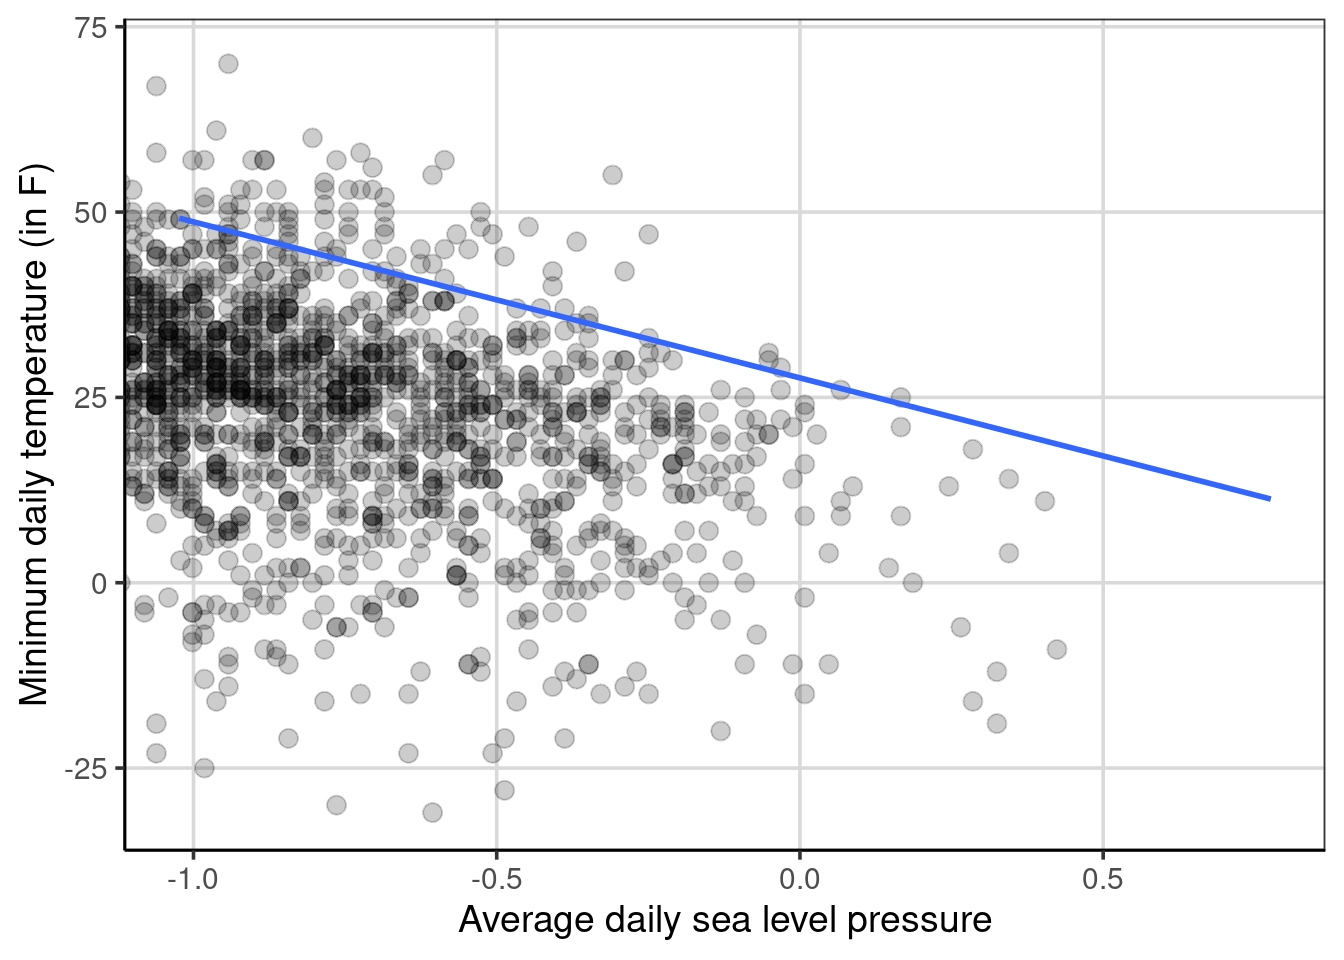 Scatterplot showing the relationship between minimum temperature by sea level pressure that is mean centered.